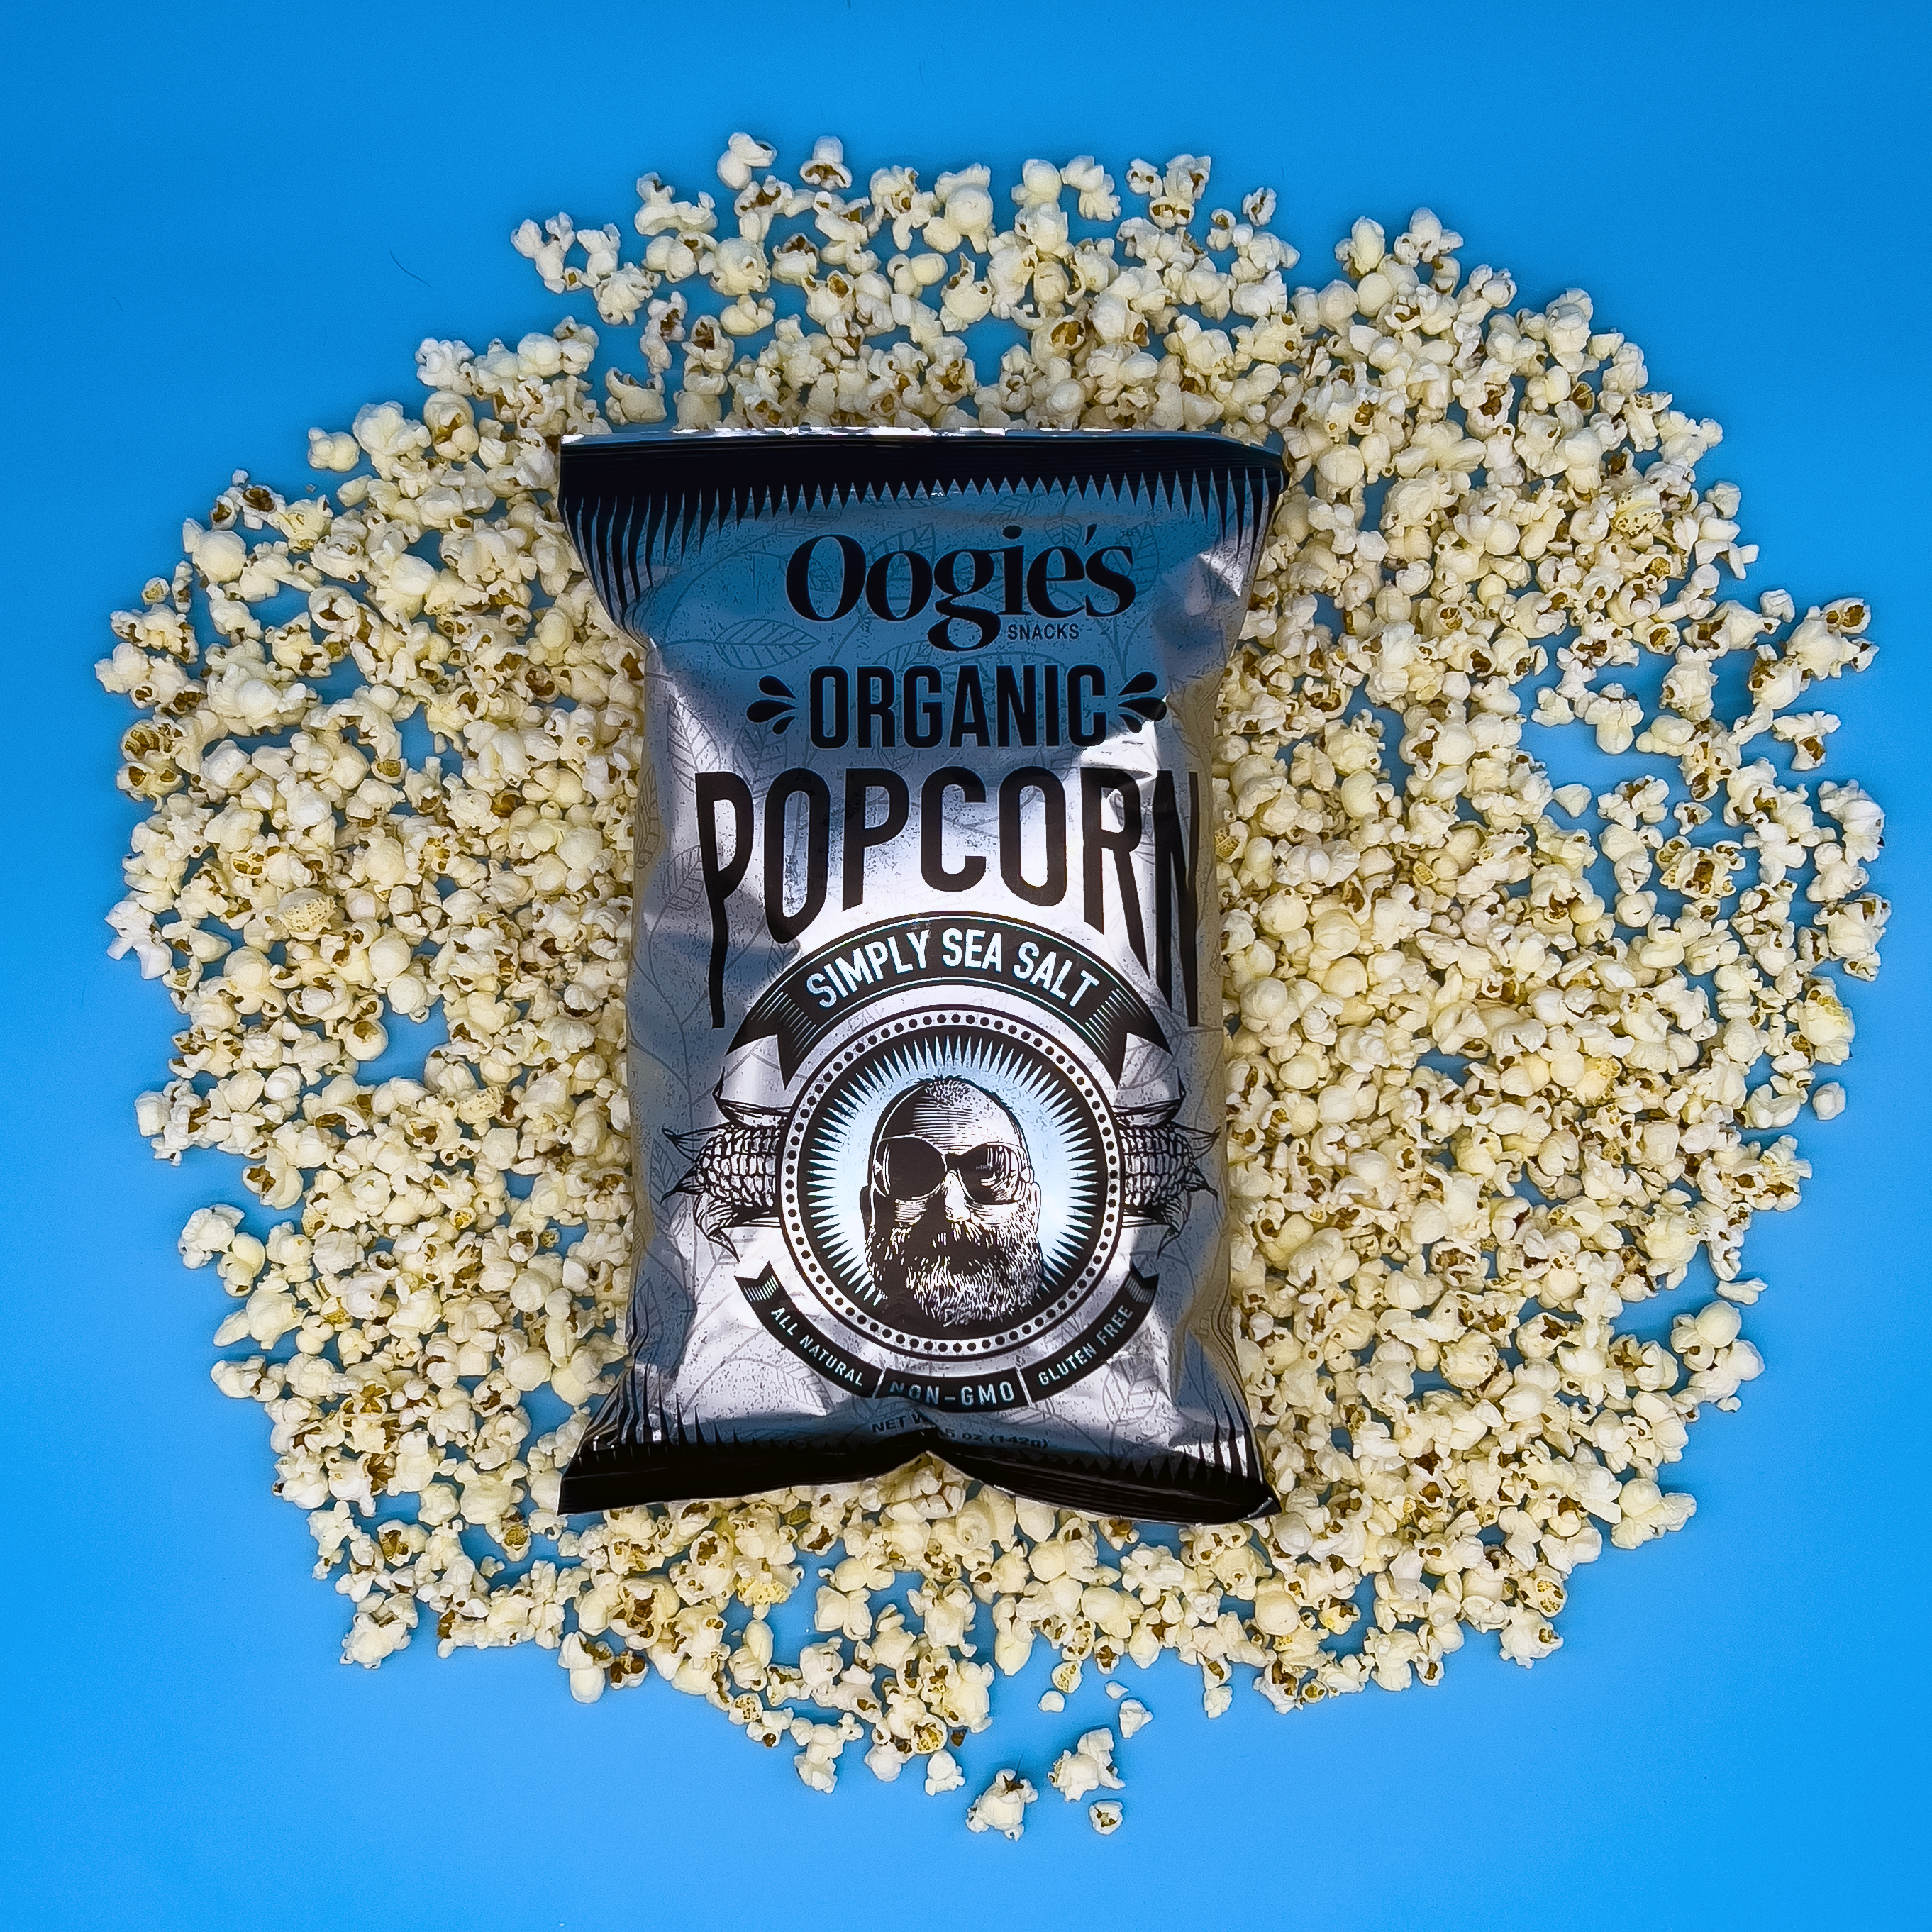 Like Air Puffcorn (Classic) | 2 4oz Bags | 50 Calories Per Cup | Gluten  Free | Nothing Artificial